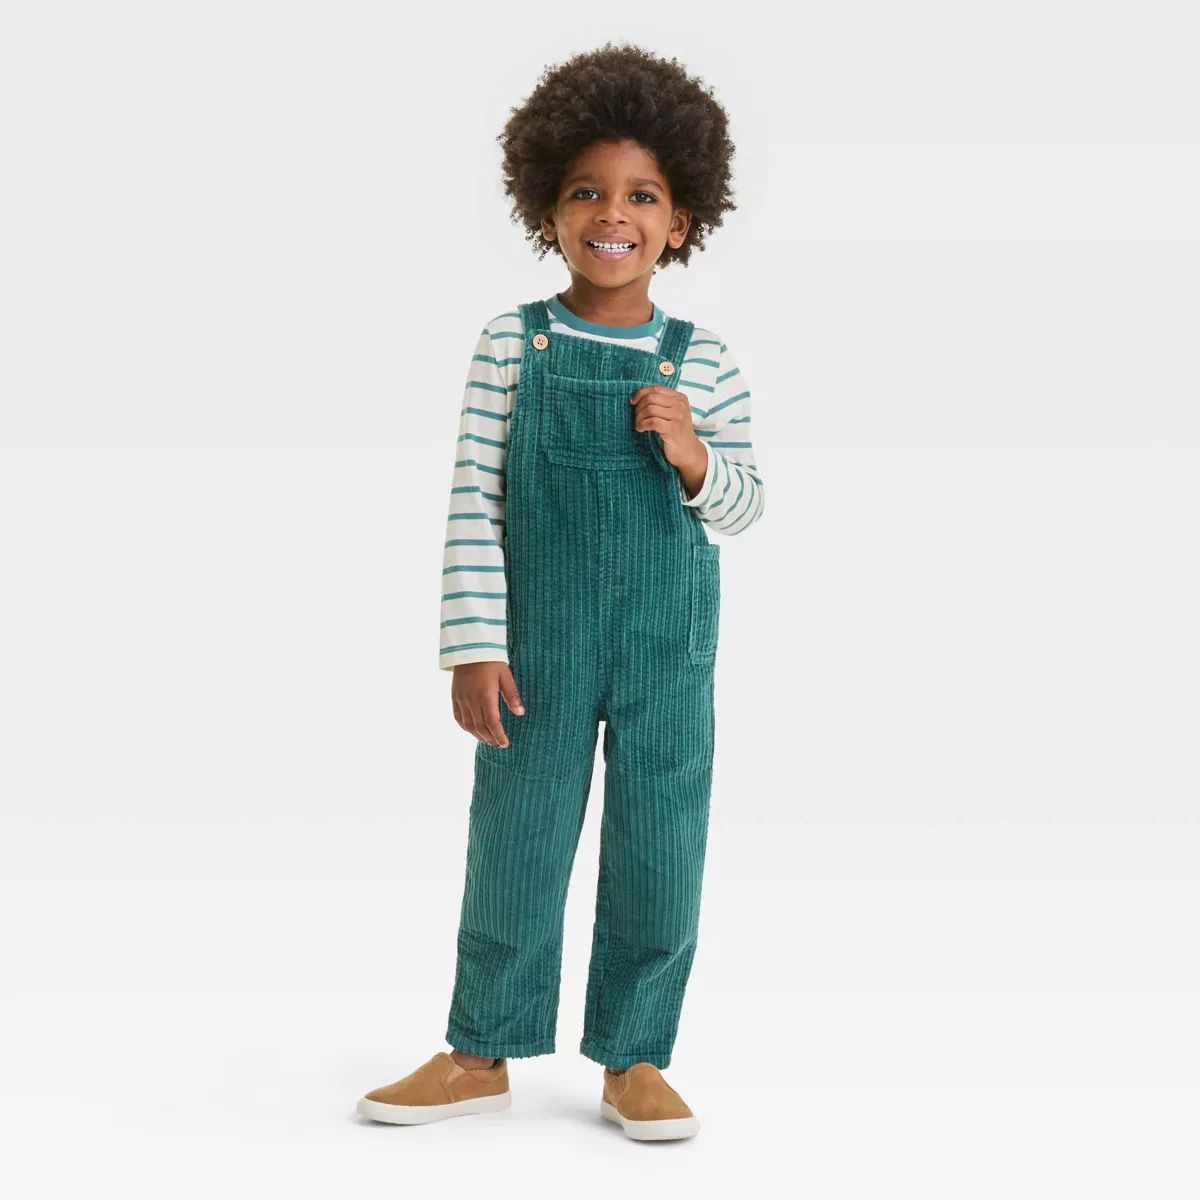 Toddler Boys' 2pc Long Sleeve T-Shirt and Corduroy Overalls Set - Cat & Jack™ Teal Green | Target